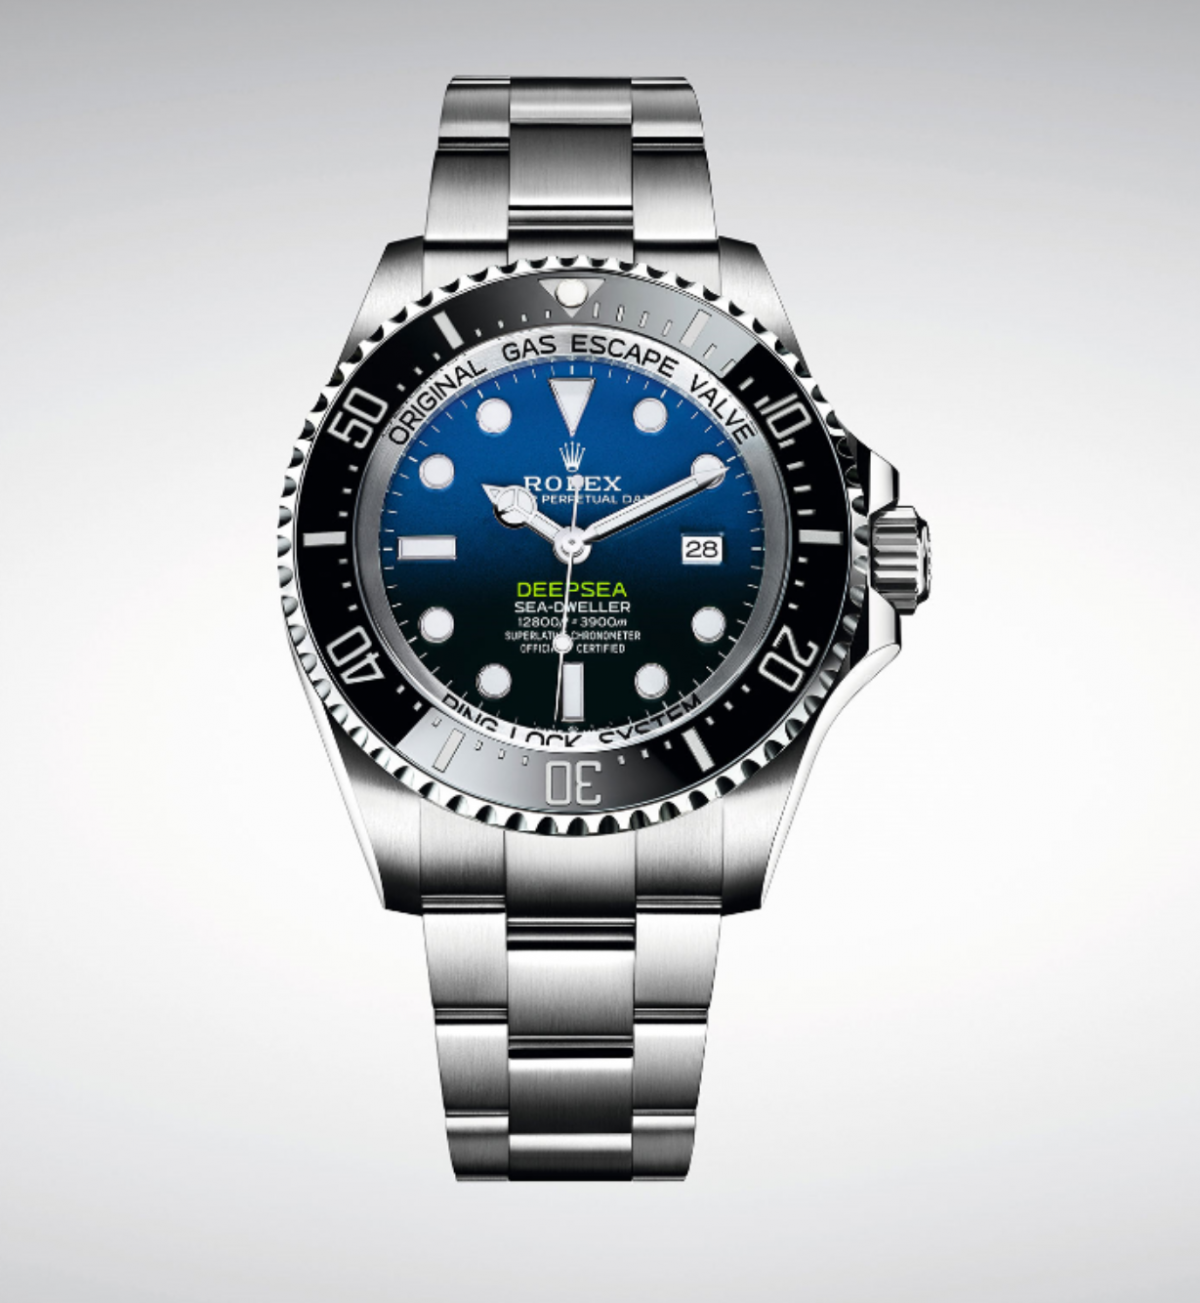 Best Quality Breitling And Rolex Replica Watches For Sale UK